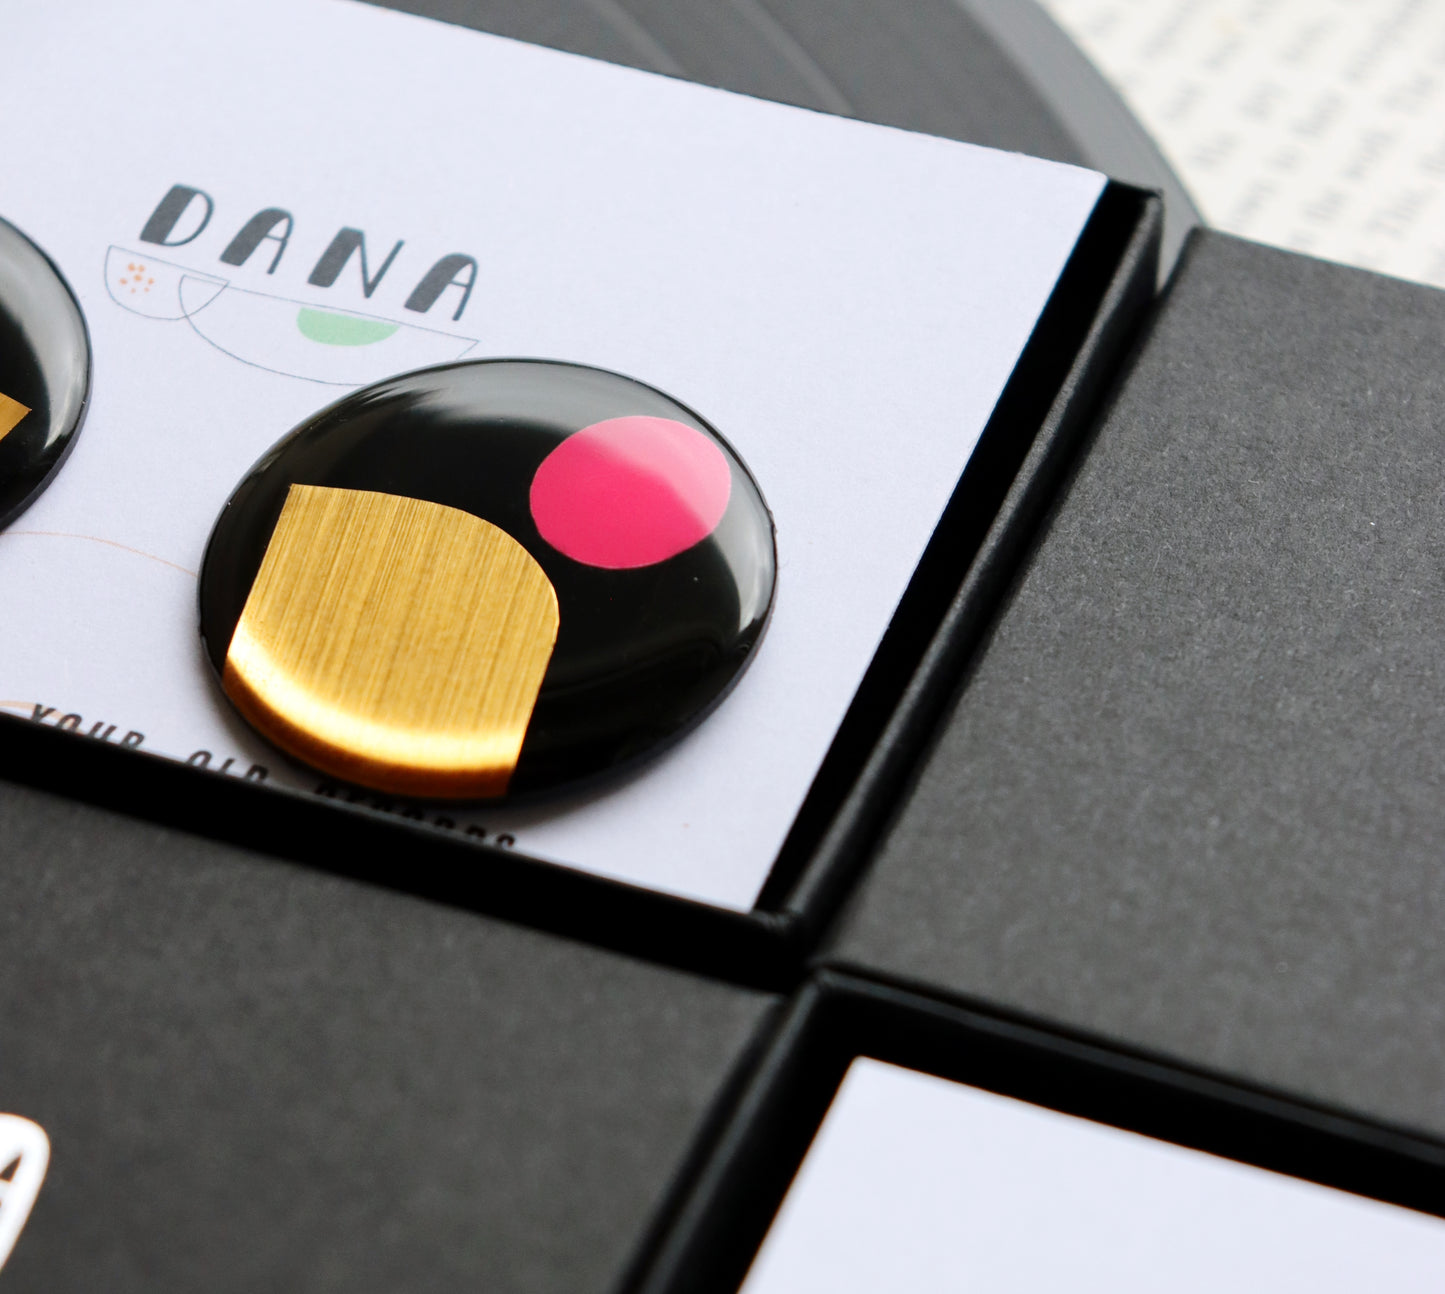 Large statement stud earrings in gold & fuchsia / upcycled vinyl record jewellery